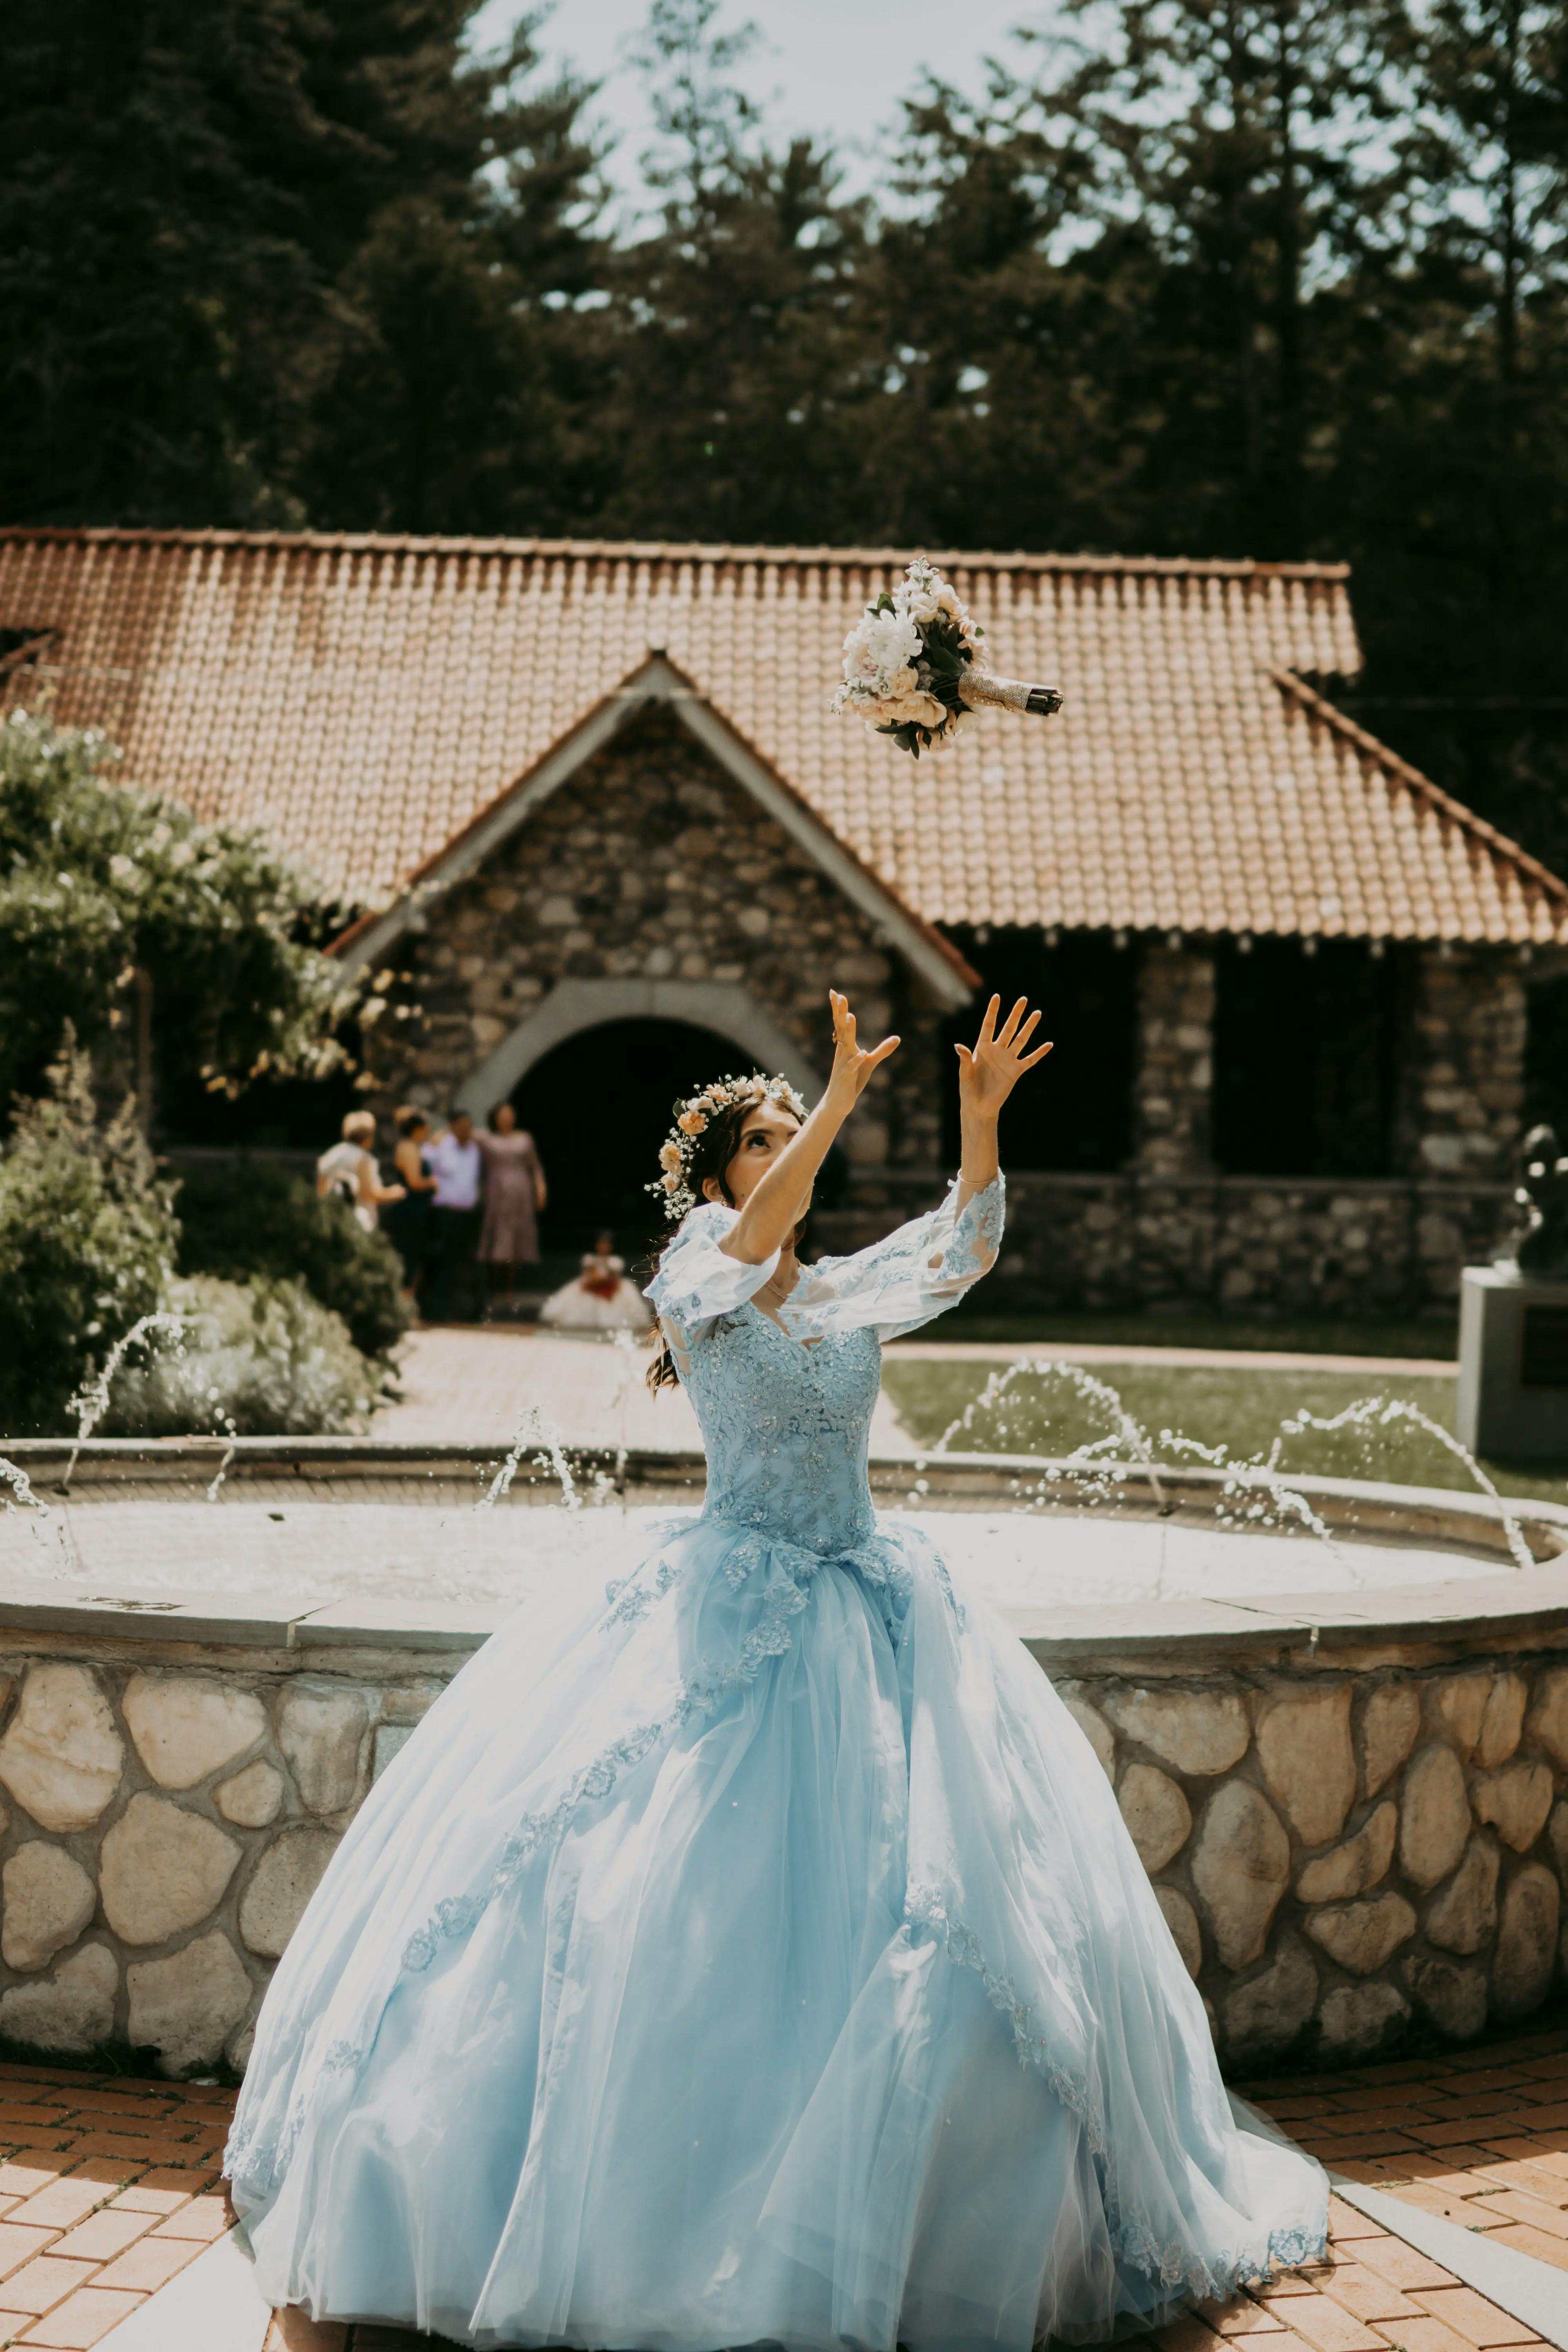 A person in elegant blue dress throwing bouquet at celebration.